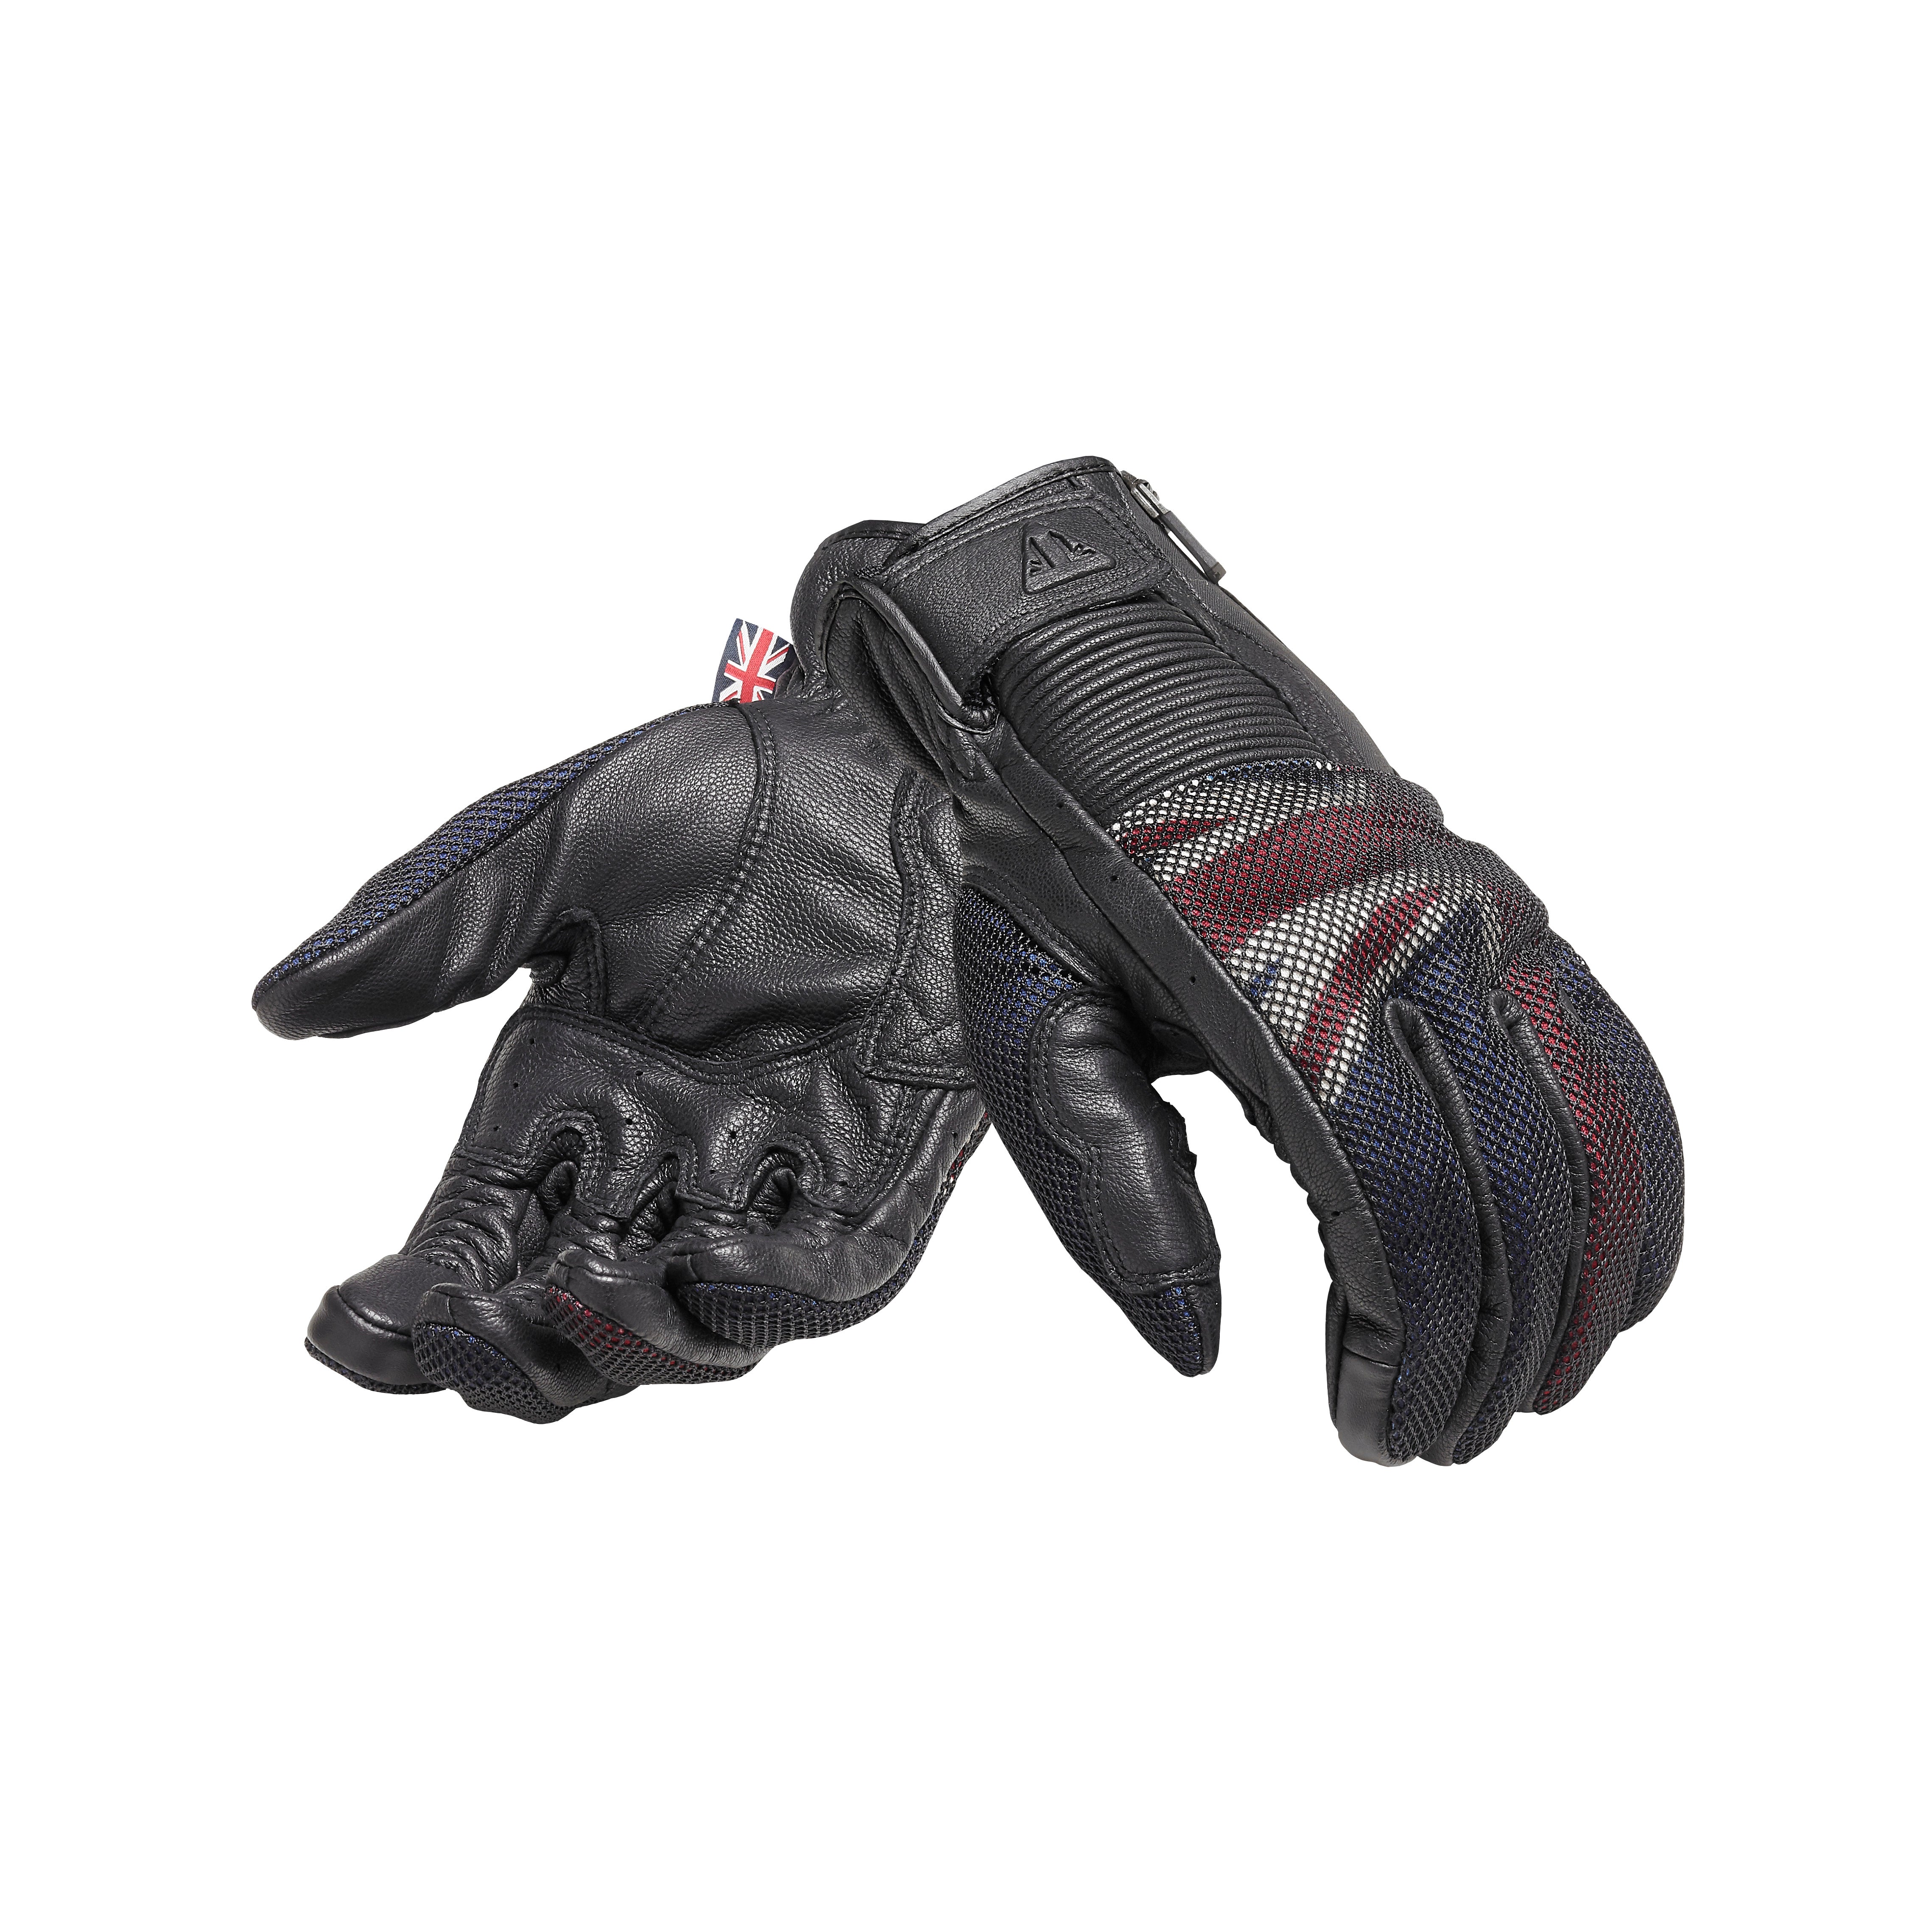 Triumph Flag Mesh and Leather Motorcycle Gloves